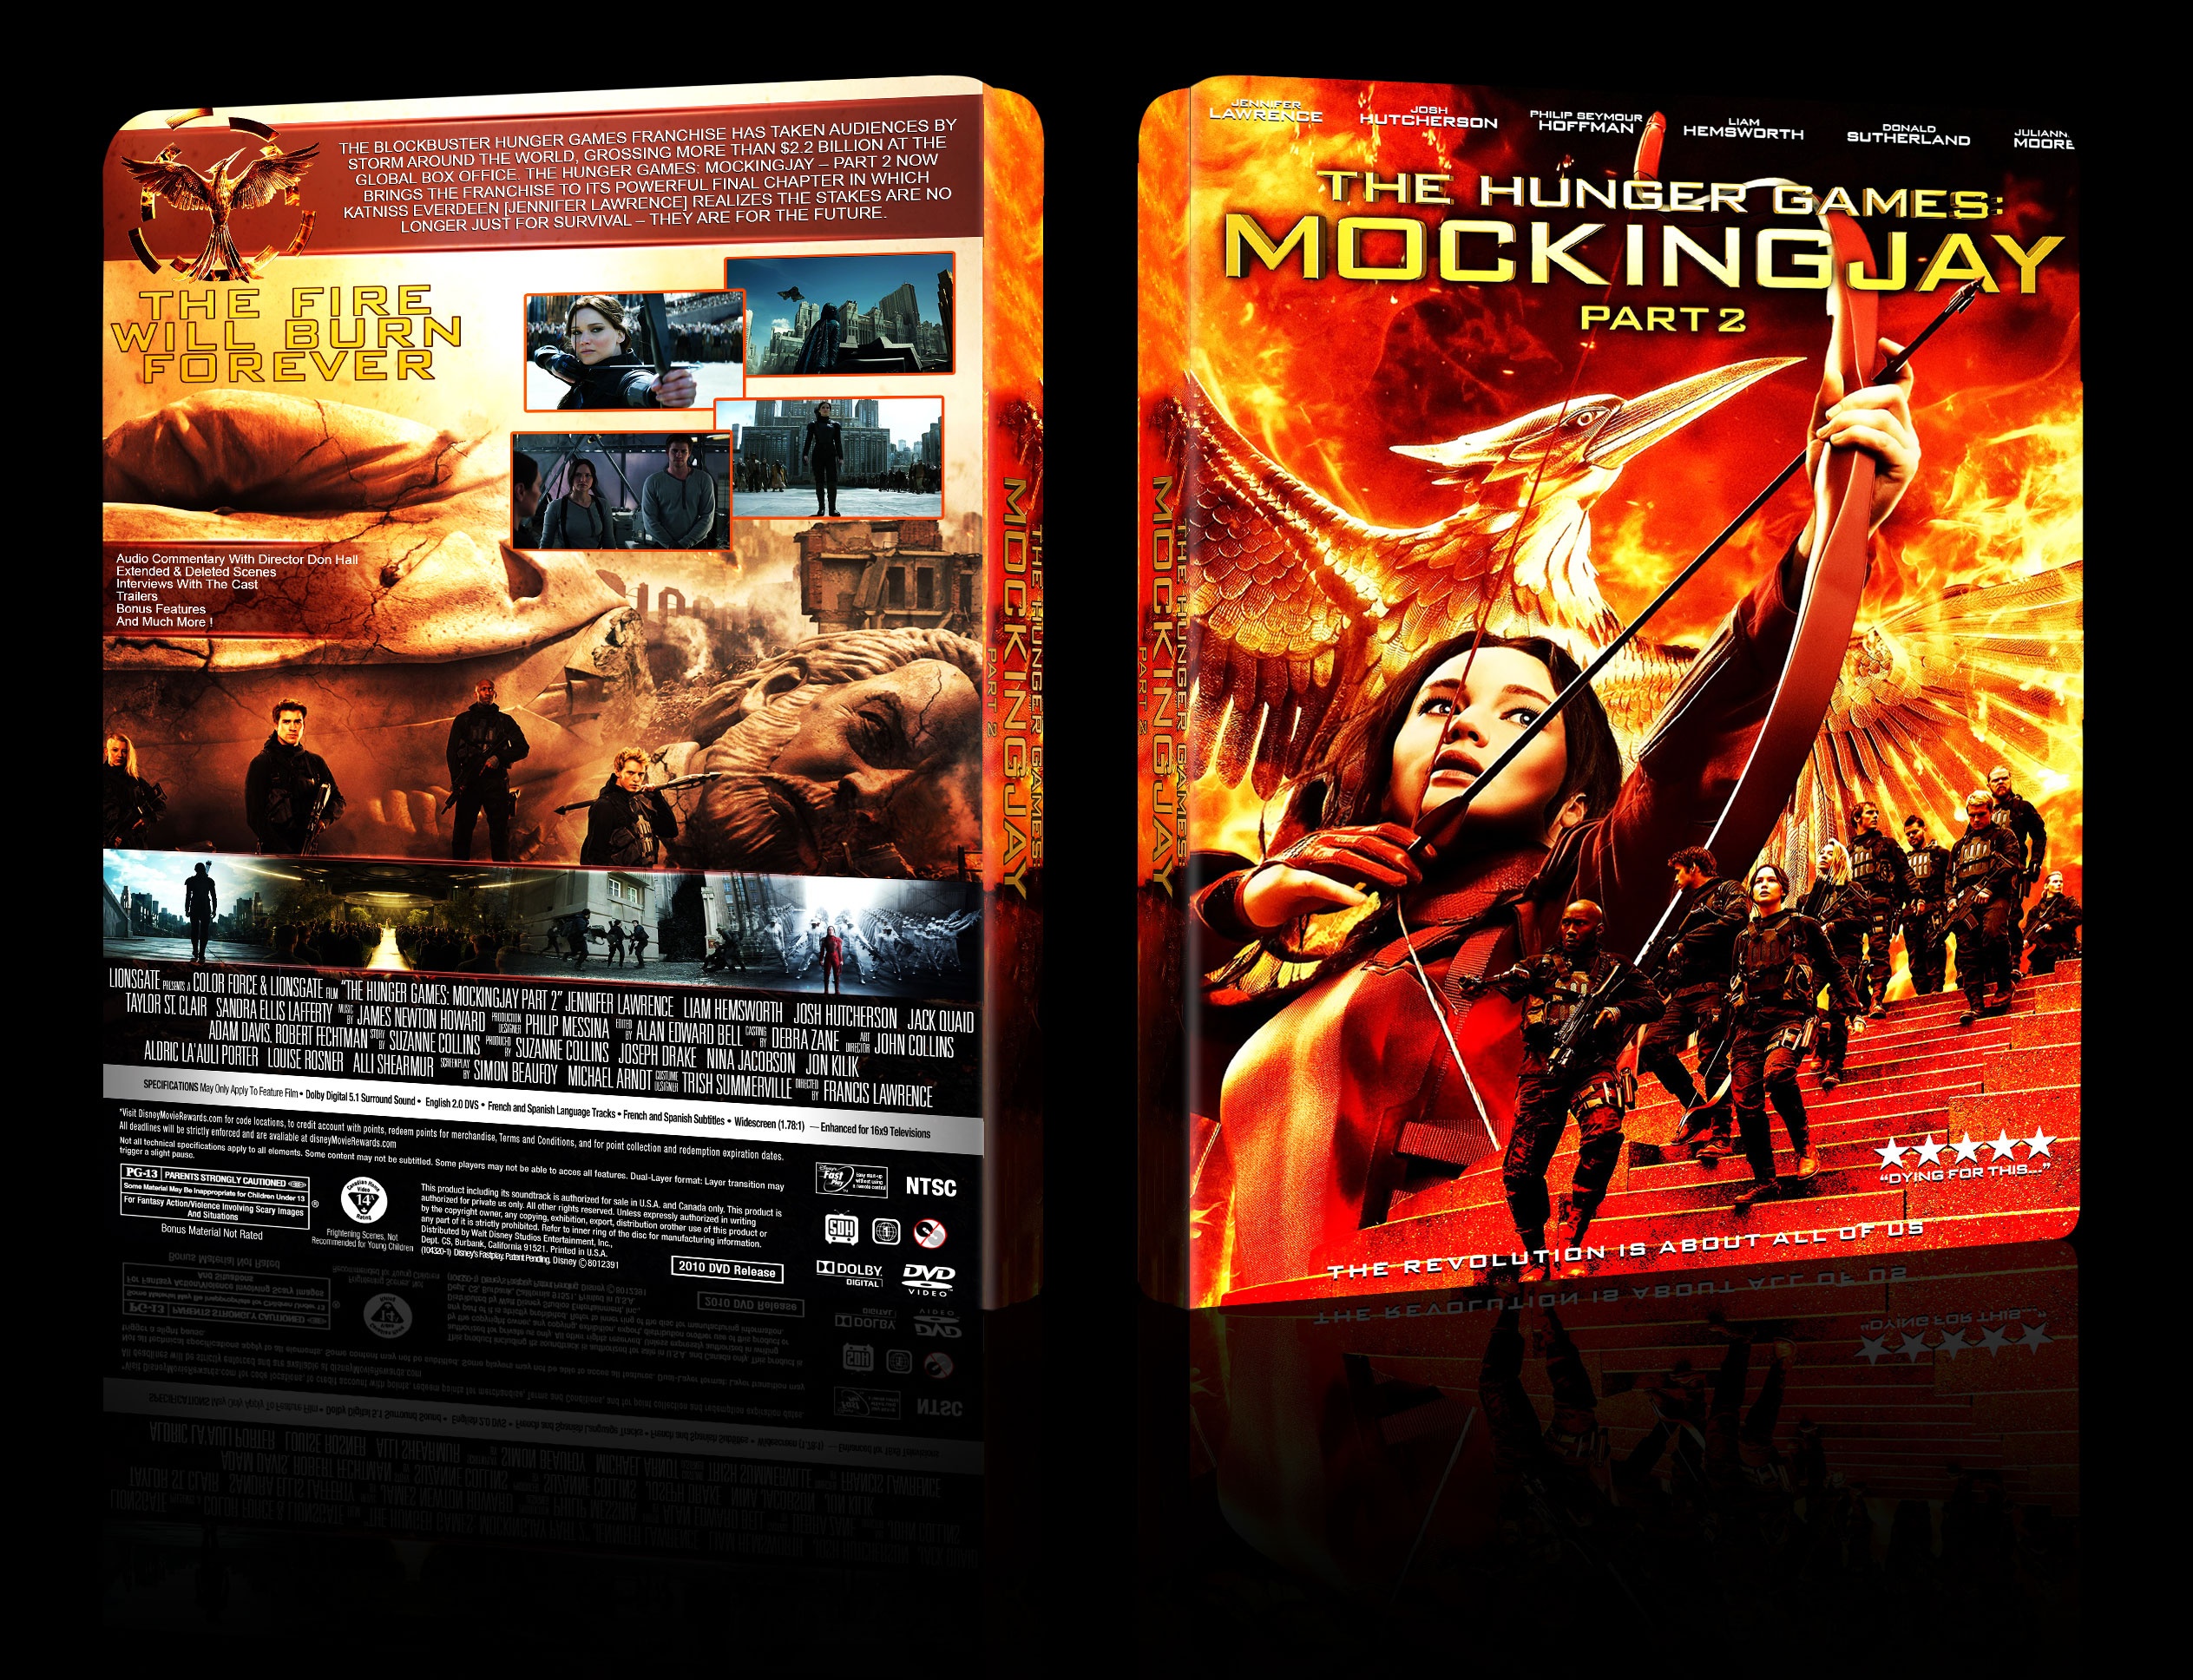 The Hunger Games: Mockingjay - Part 2 box cover